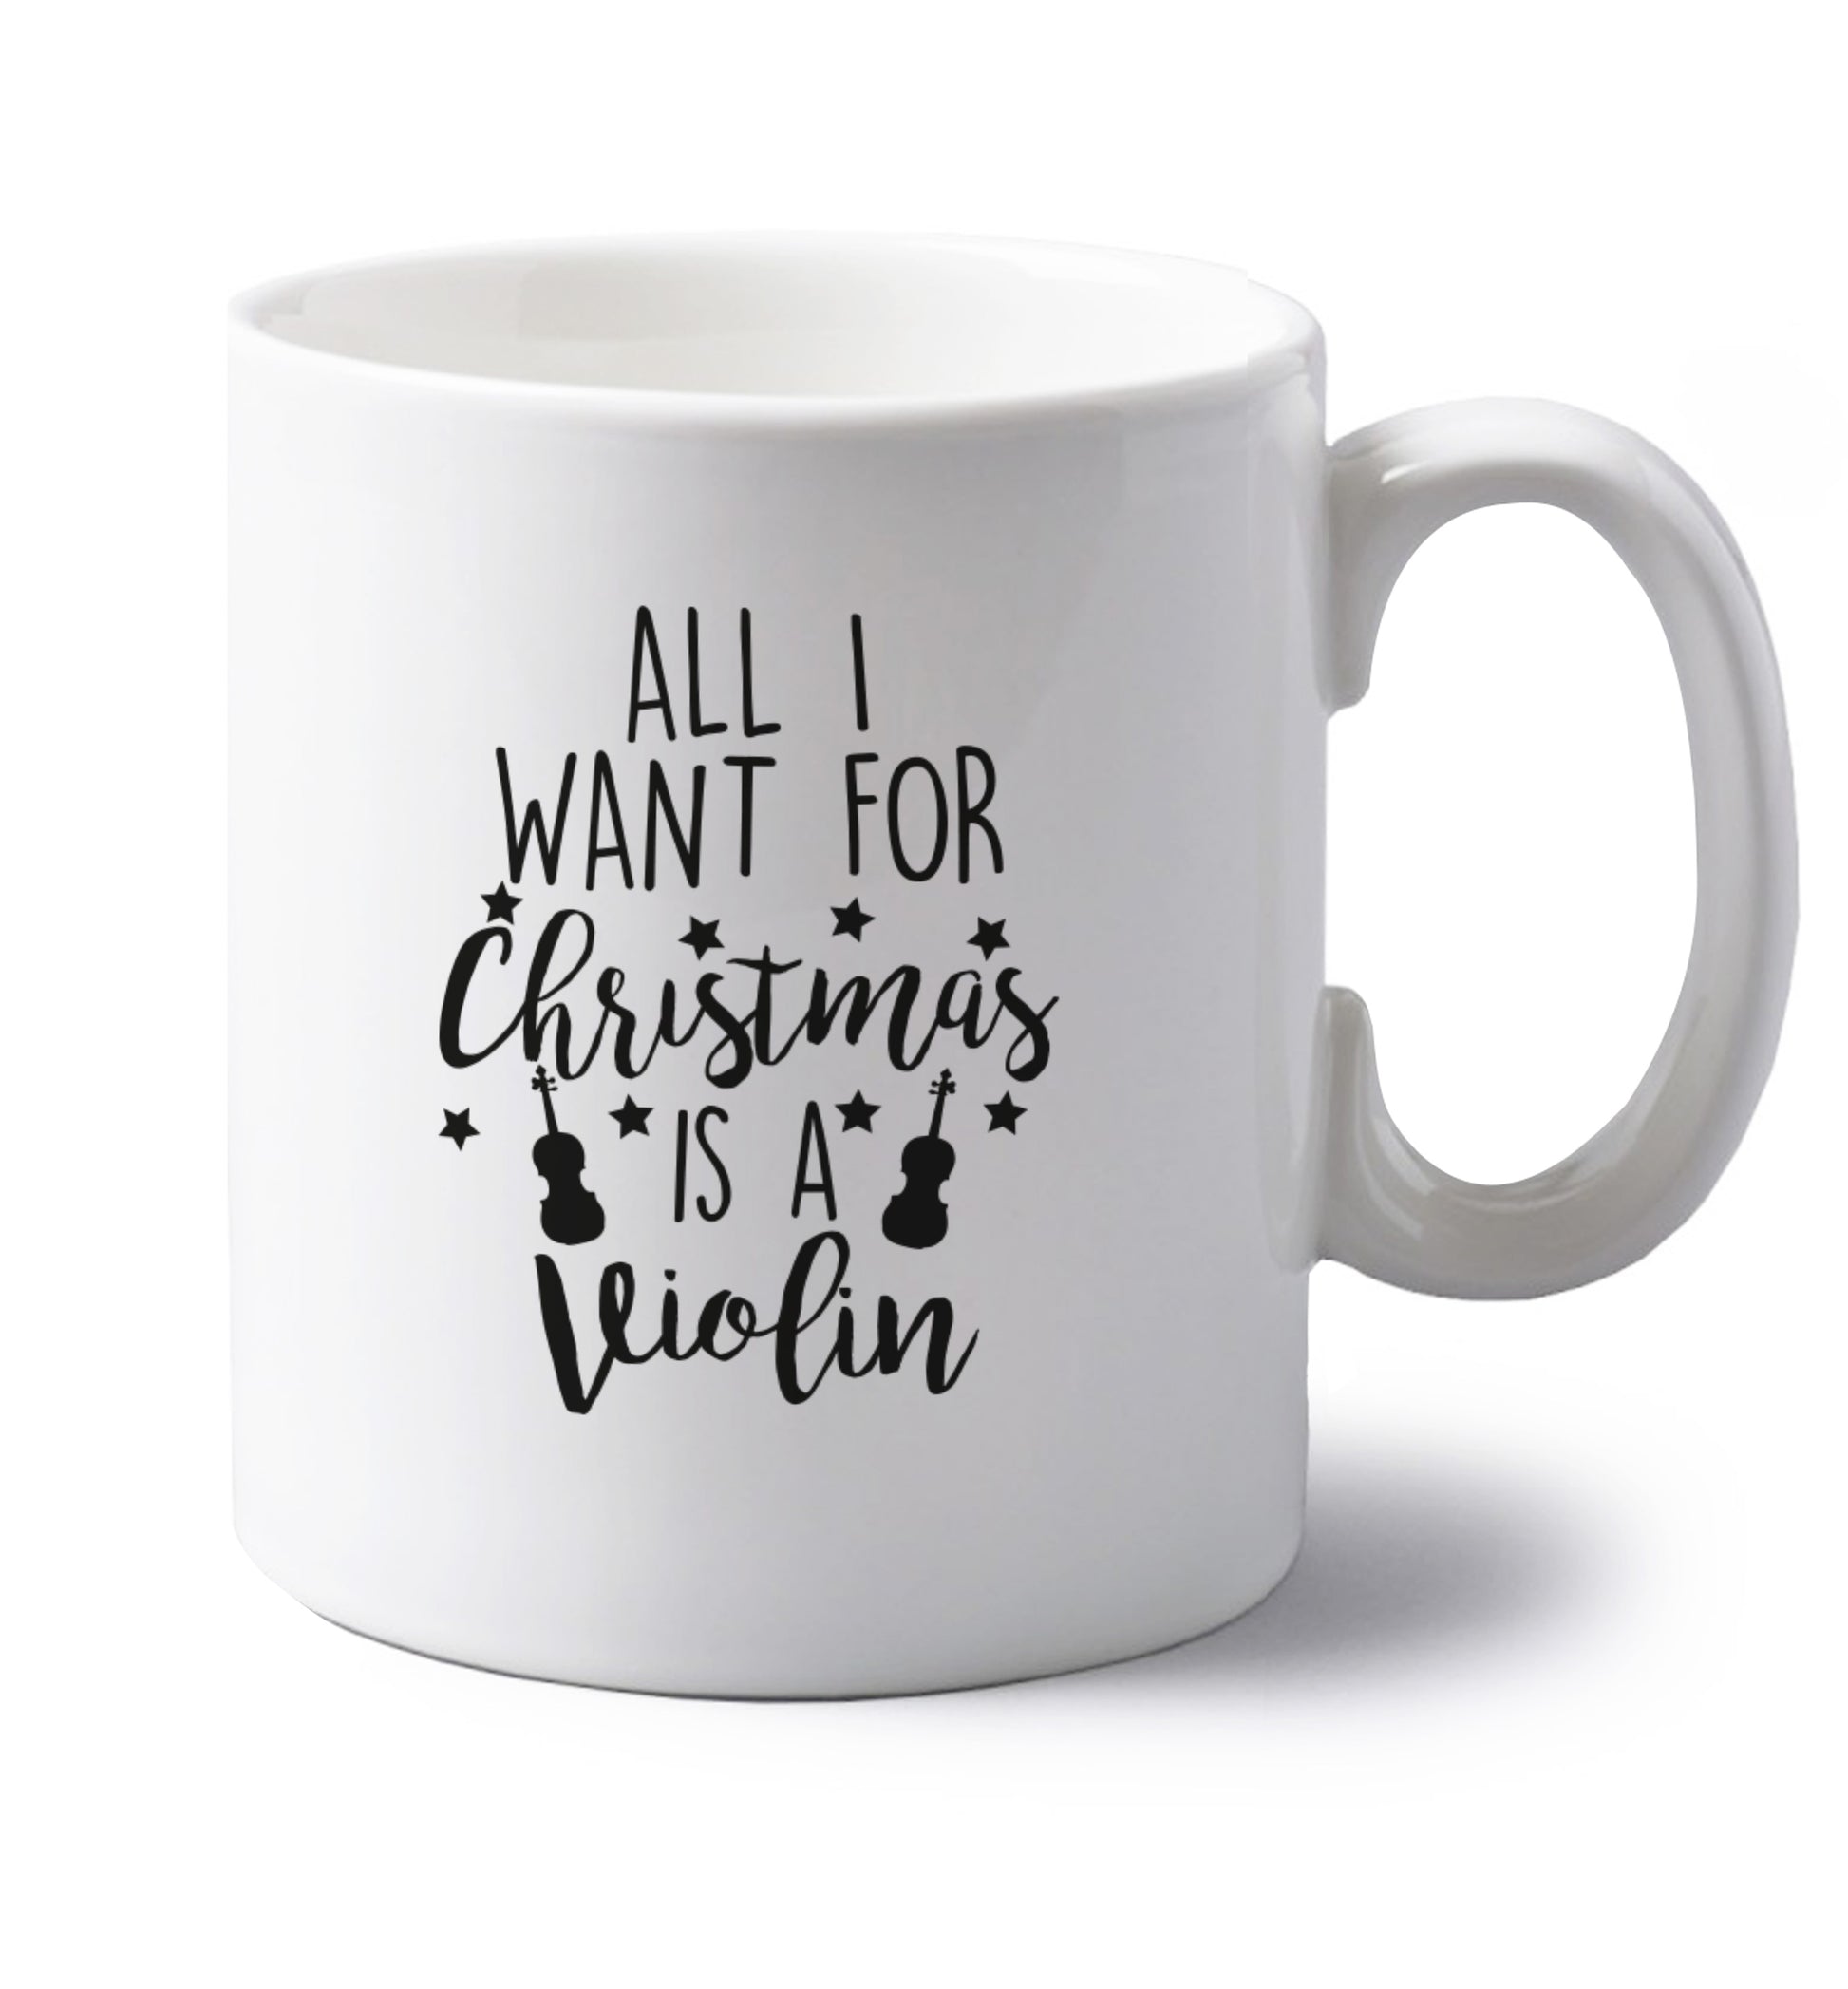 All I Want For Christmas is a Violin left handed white ceramic mug 